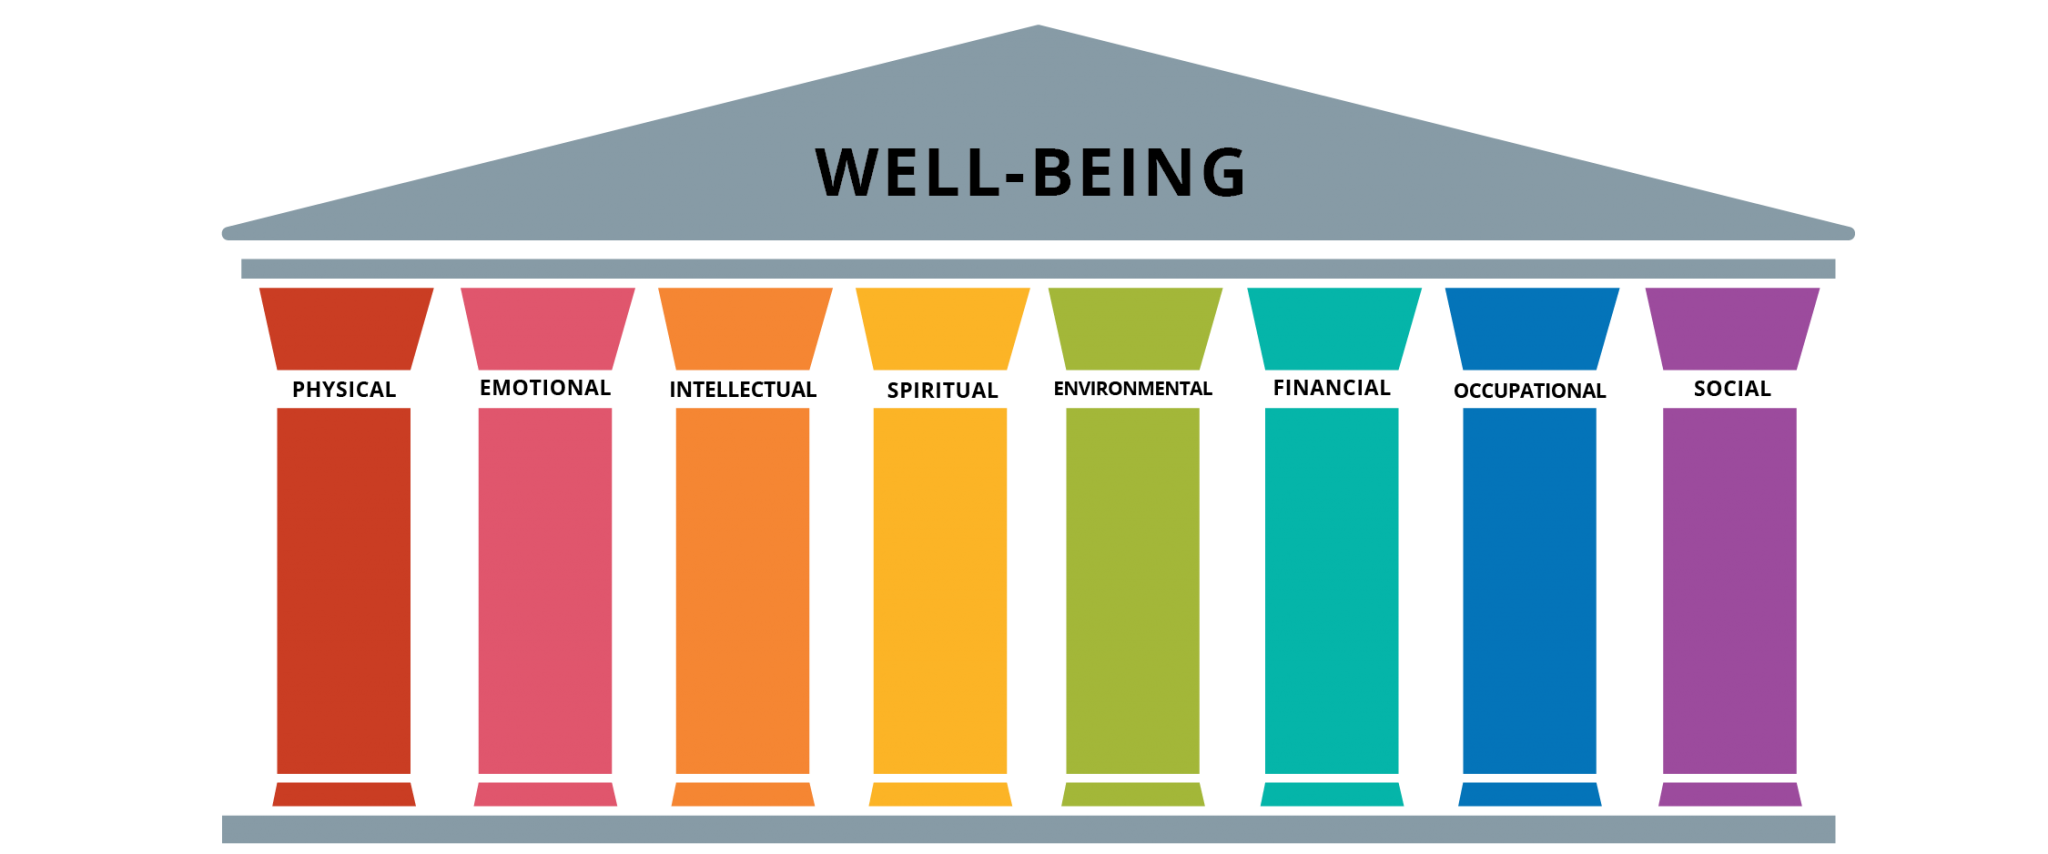 pillars of Well-Being graphic: Physical, Emotional, Intellectual, Spiritual, Environmental, Financial, Occupational, Social